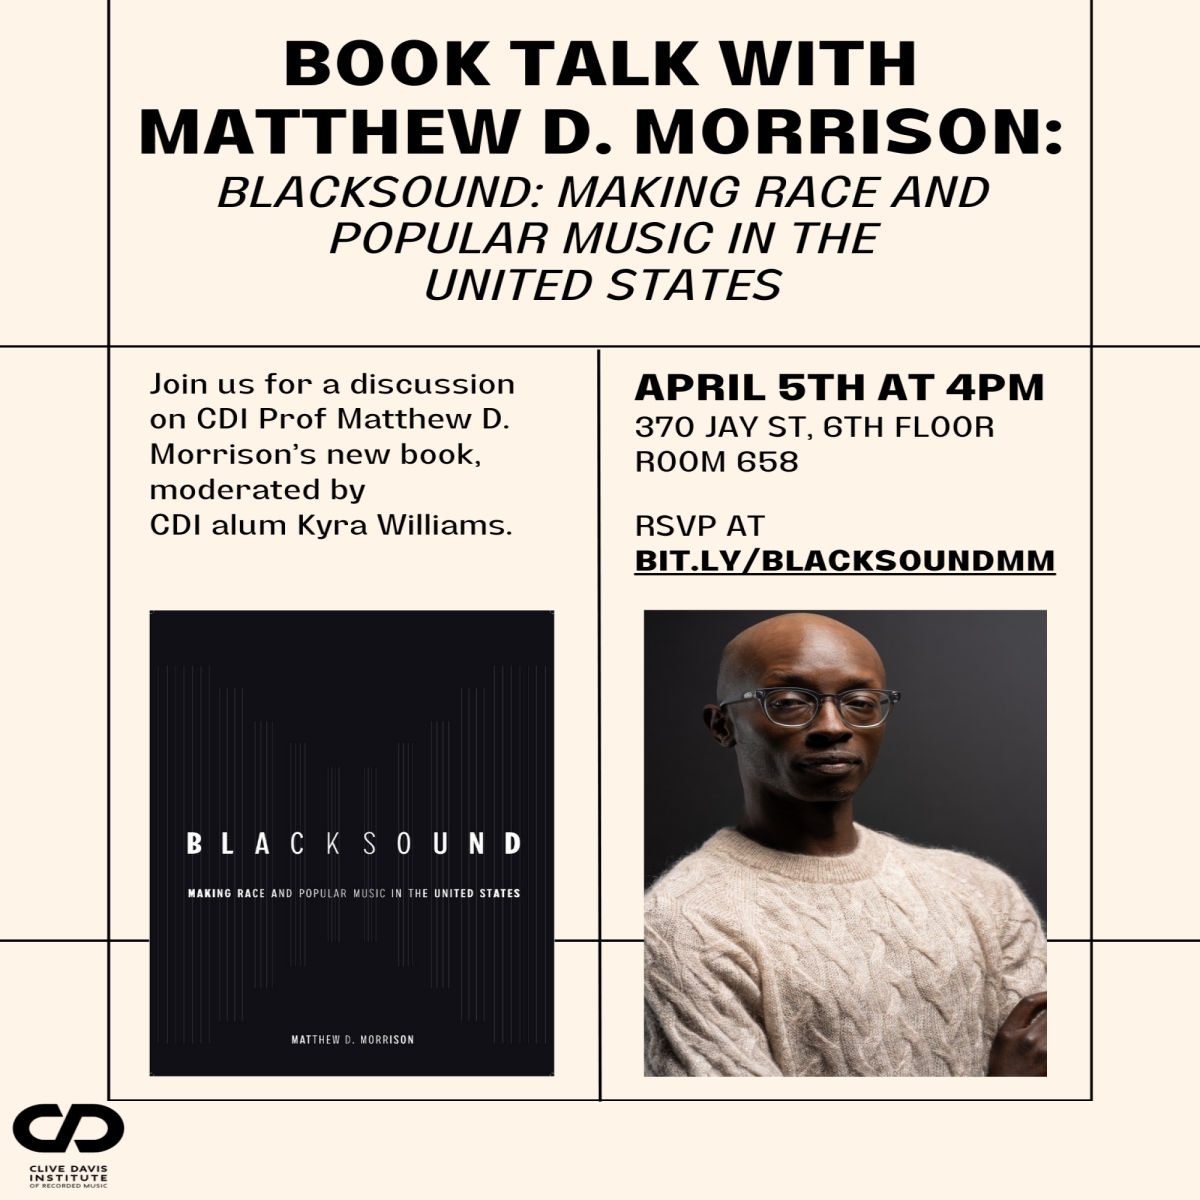 Join the Clive Davis Institute for a discussion with our very own Associate Professor Matthew D. Morrison on his new book